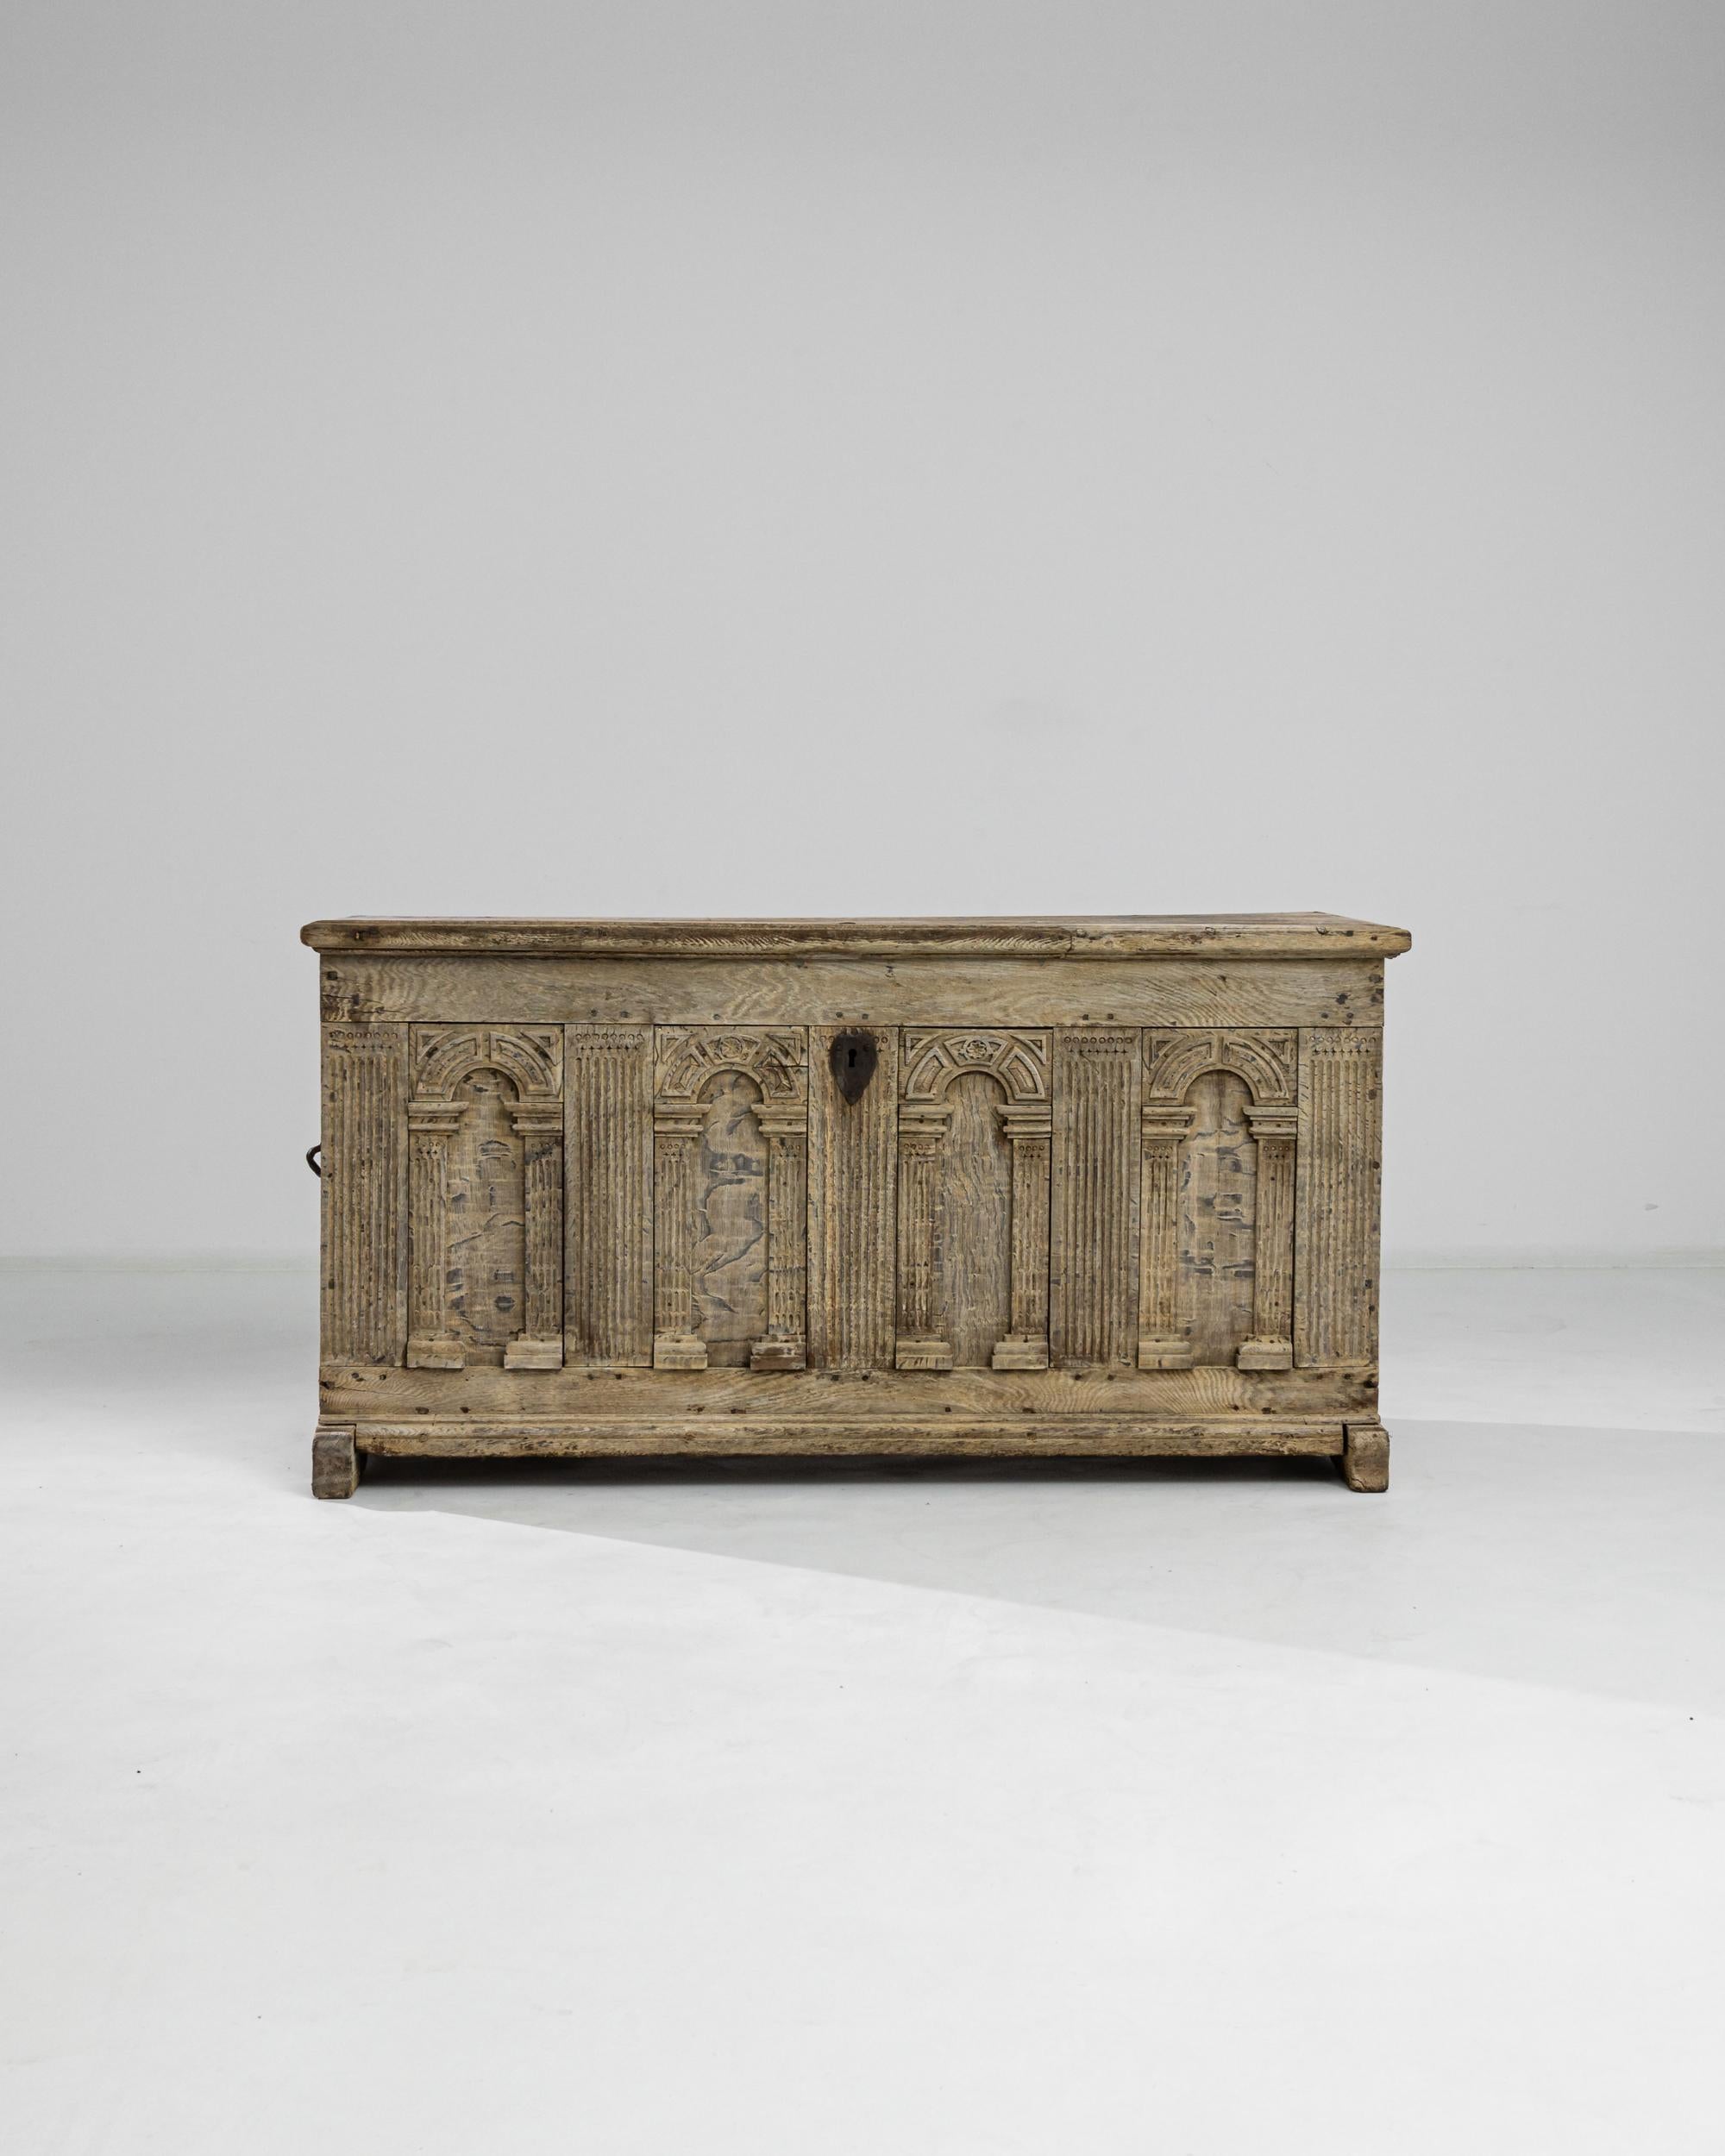 Ample and solid, this unique trunk was built out of oak in Germany circa 1800. The facade boasts four ornate panels hand-carved in the shape of classic arches, which are enlivened with ancient ornamental motifs. Original iron pulls on the sides